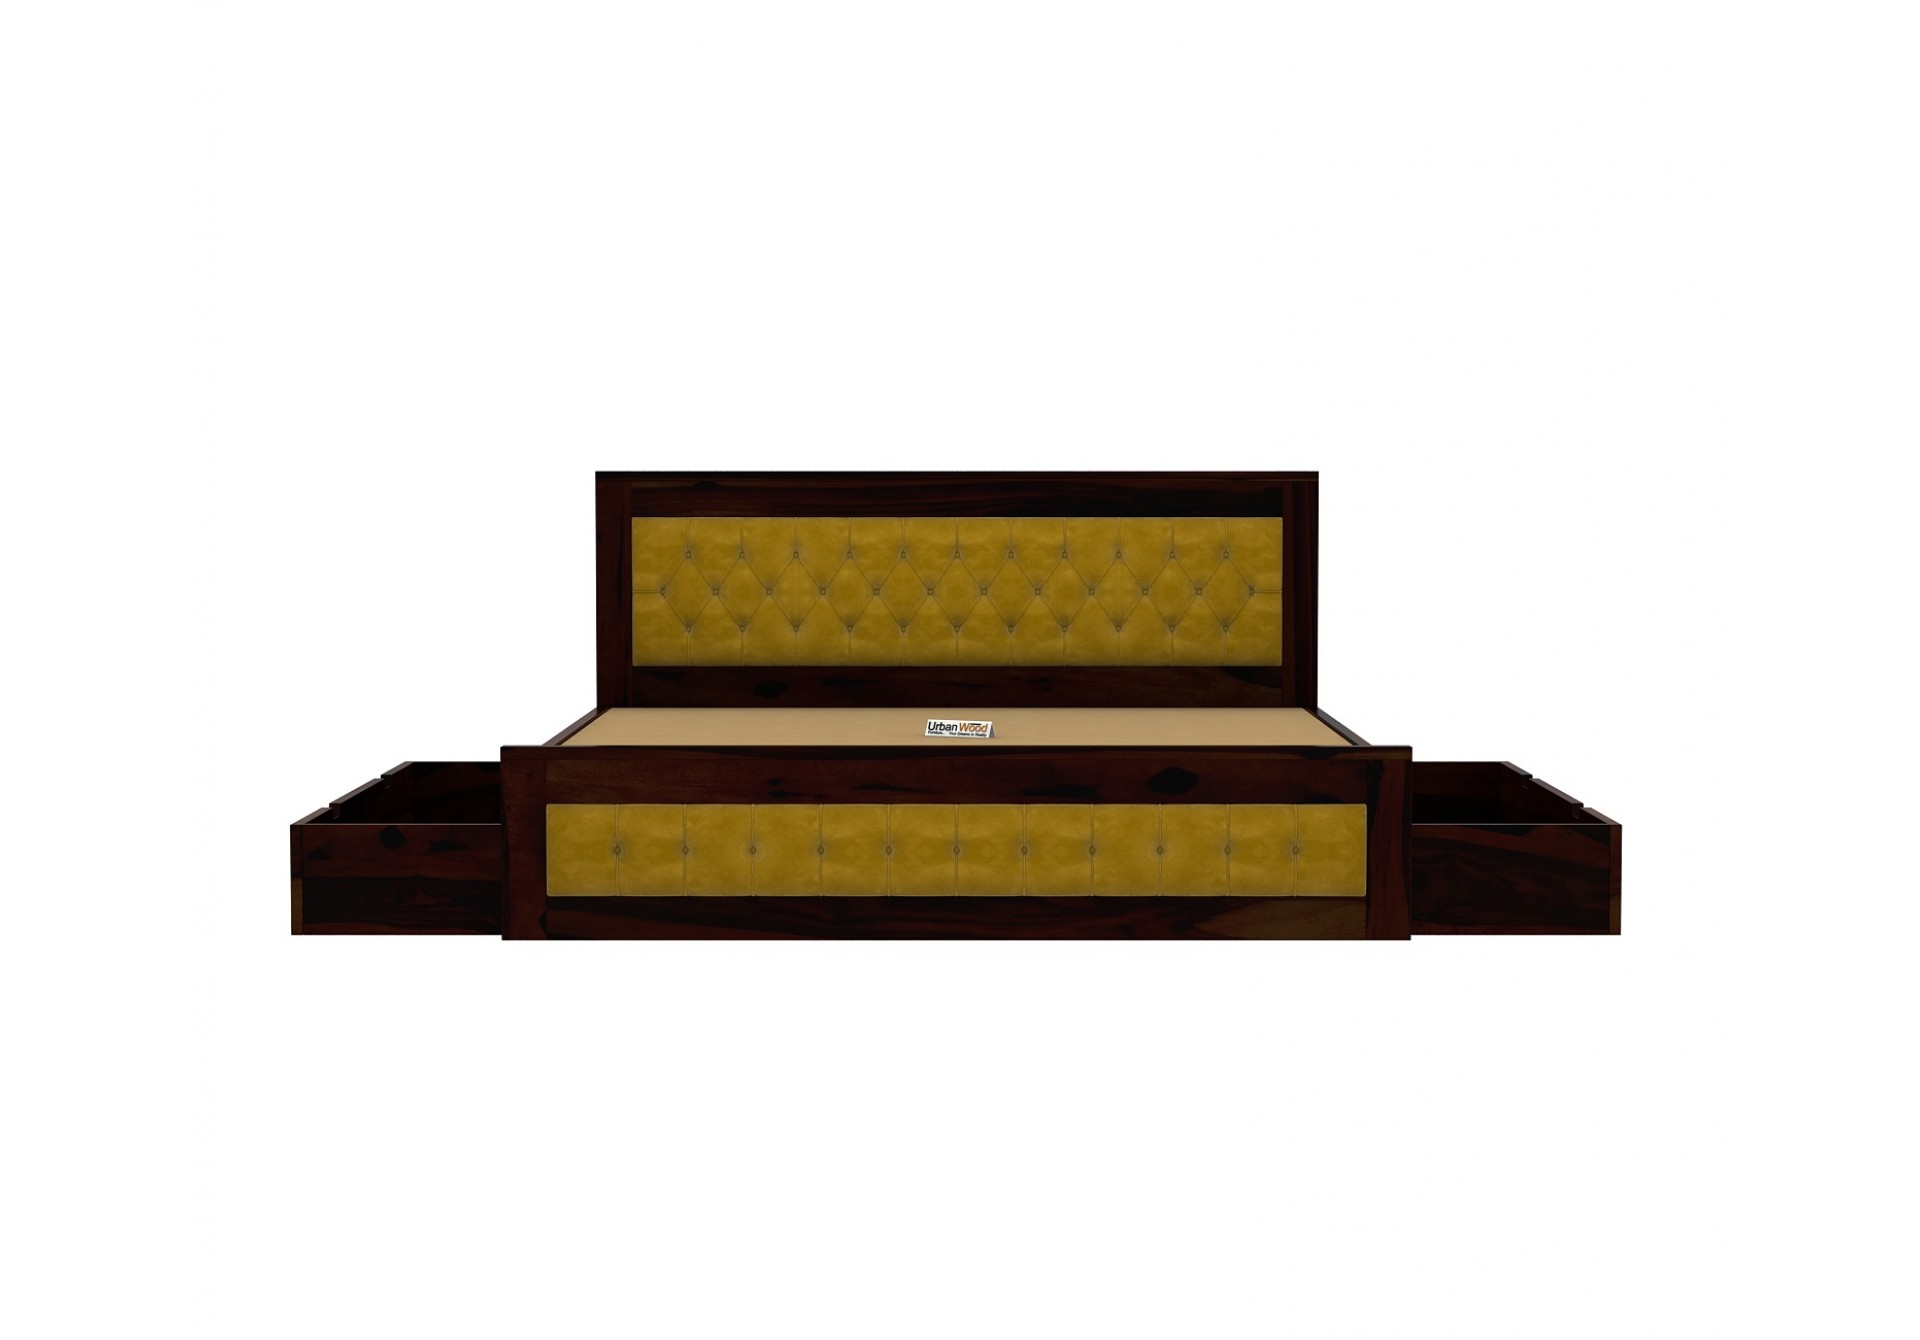 Jolly Wooden Bed with Drawer Storage ( King Size, Walnut Finish )